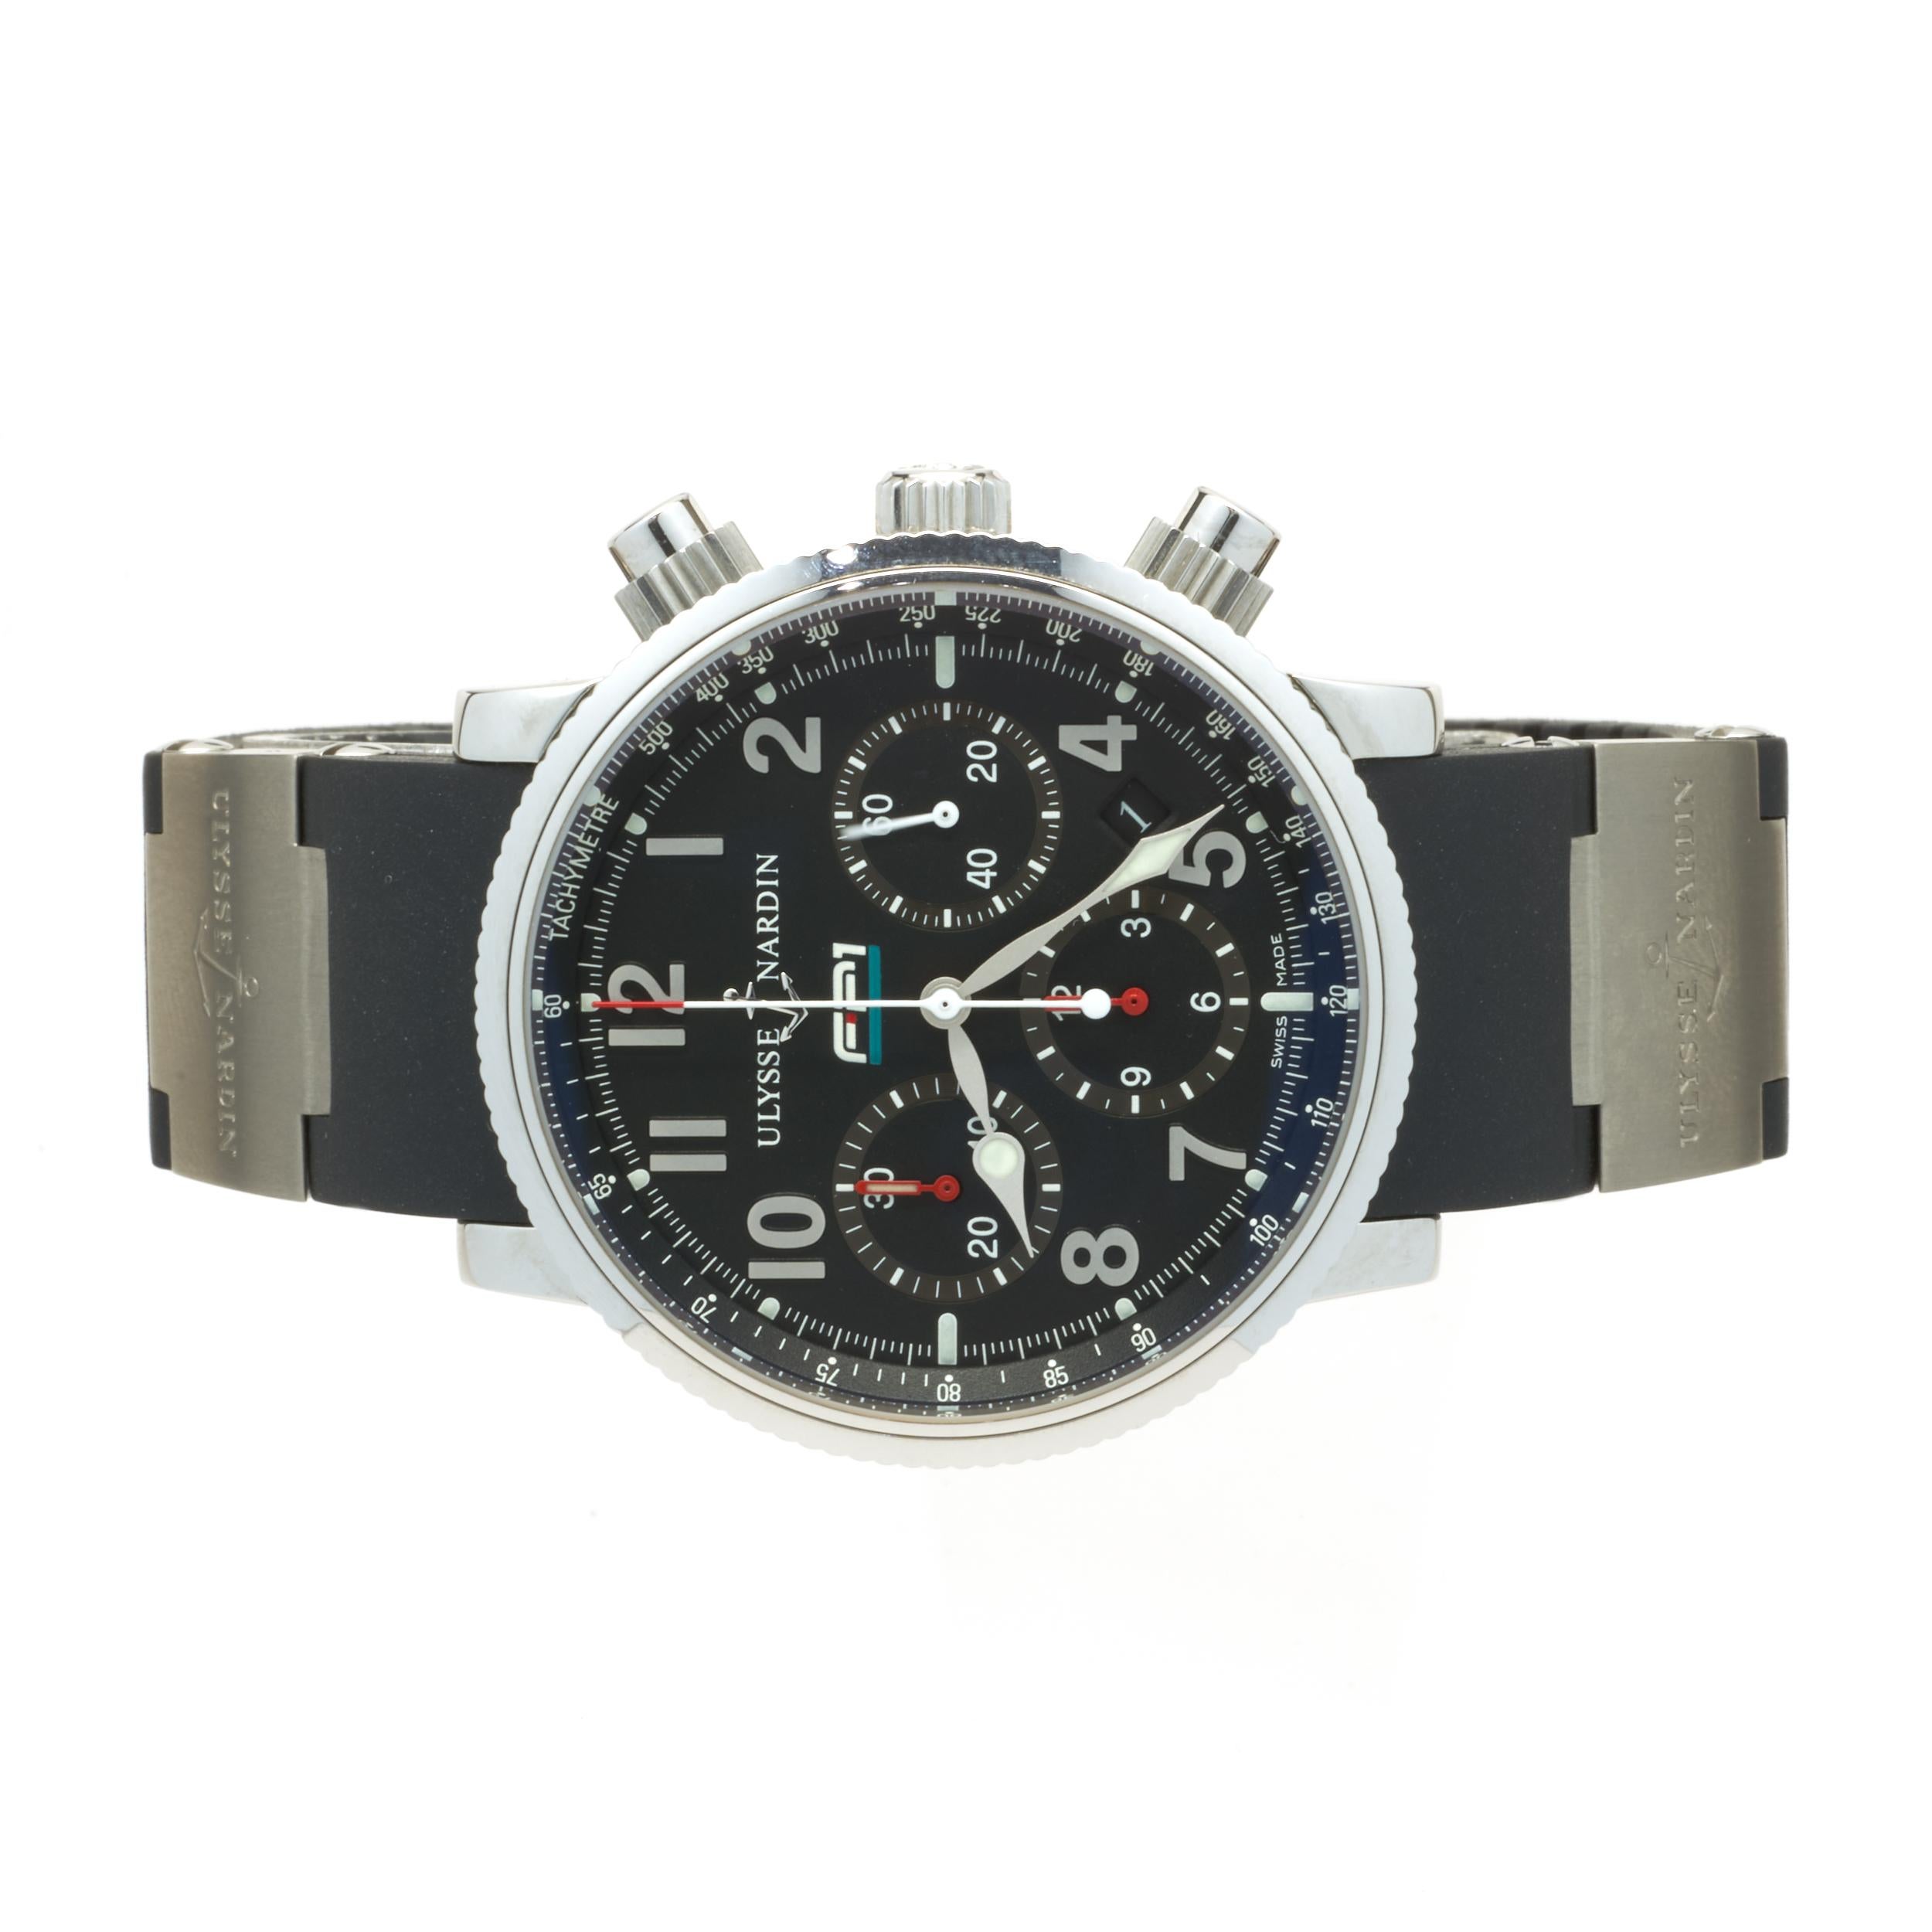 Movement: automatic
Function: hours, minutes, seconds, date, chronograph
Case: 40mm stainless steel case, sapphire crystal, screw down crown
Band: black rubber strap, deployment clasp 
Dial: black chronograph arabic dial
Serial#: XXX/110
Reference#: